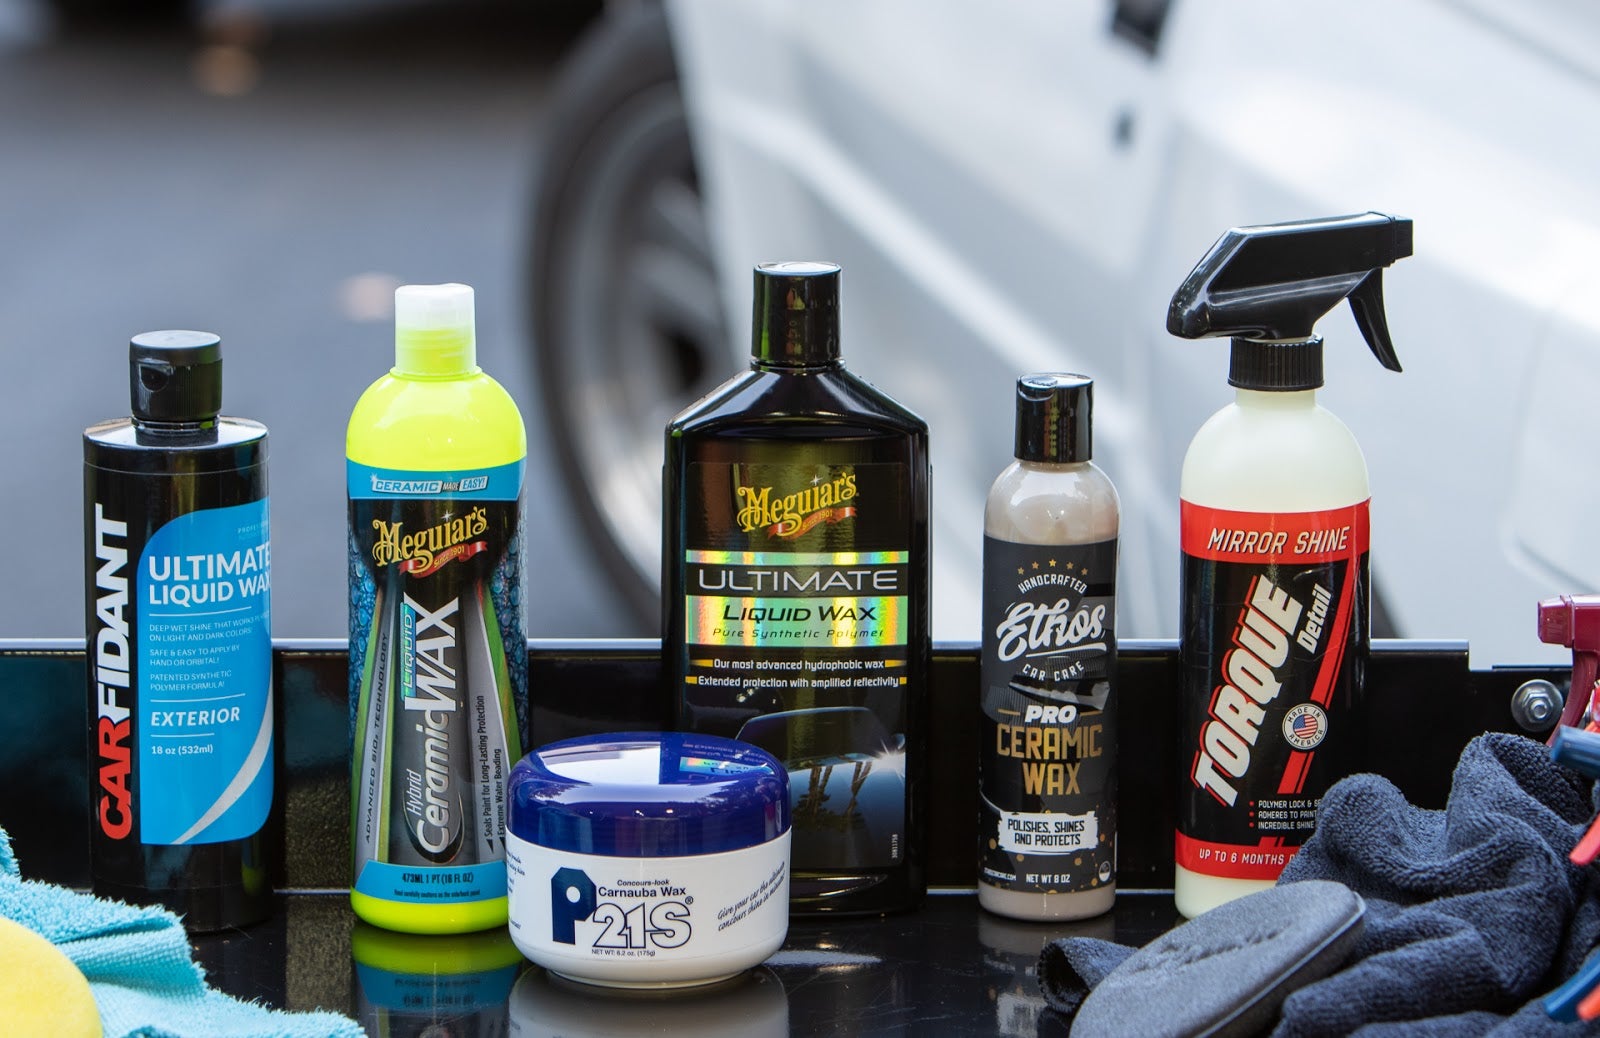 Ethos Car Care Review: Auto Cleaning Products I Swear by for My Car